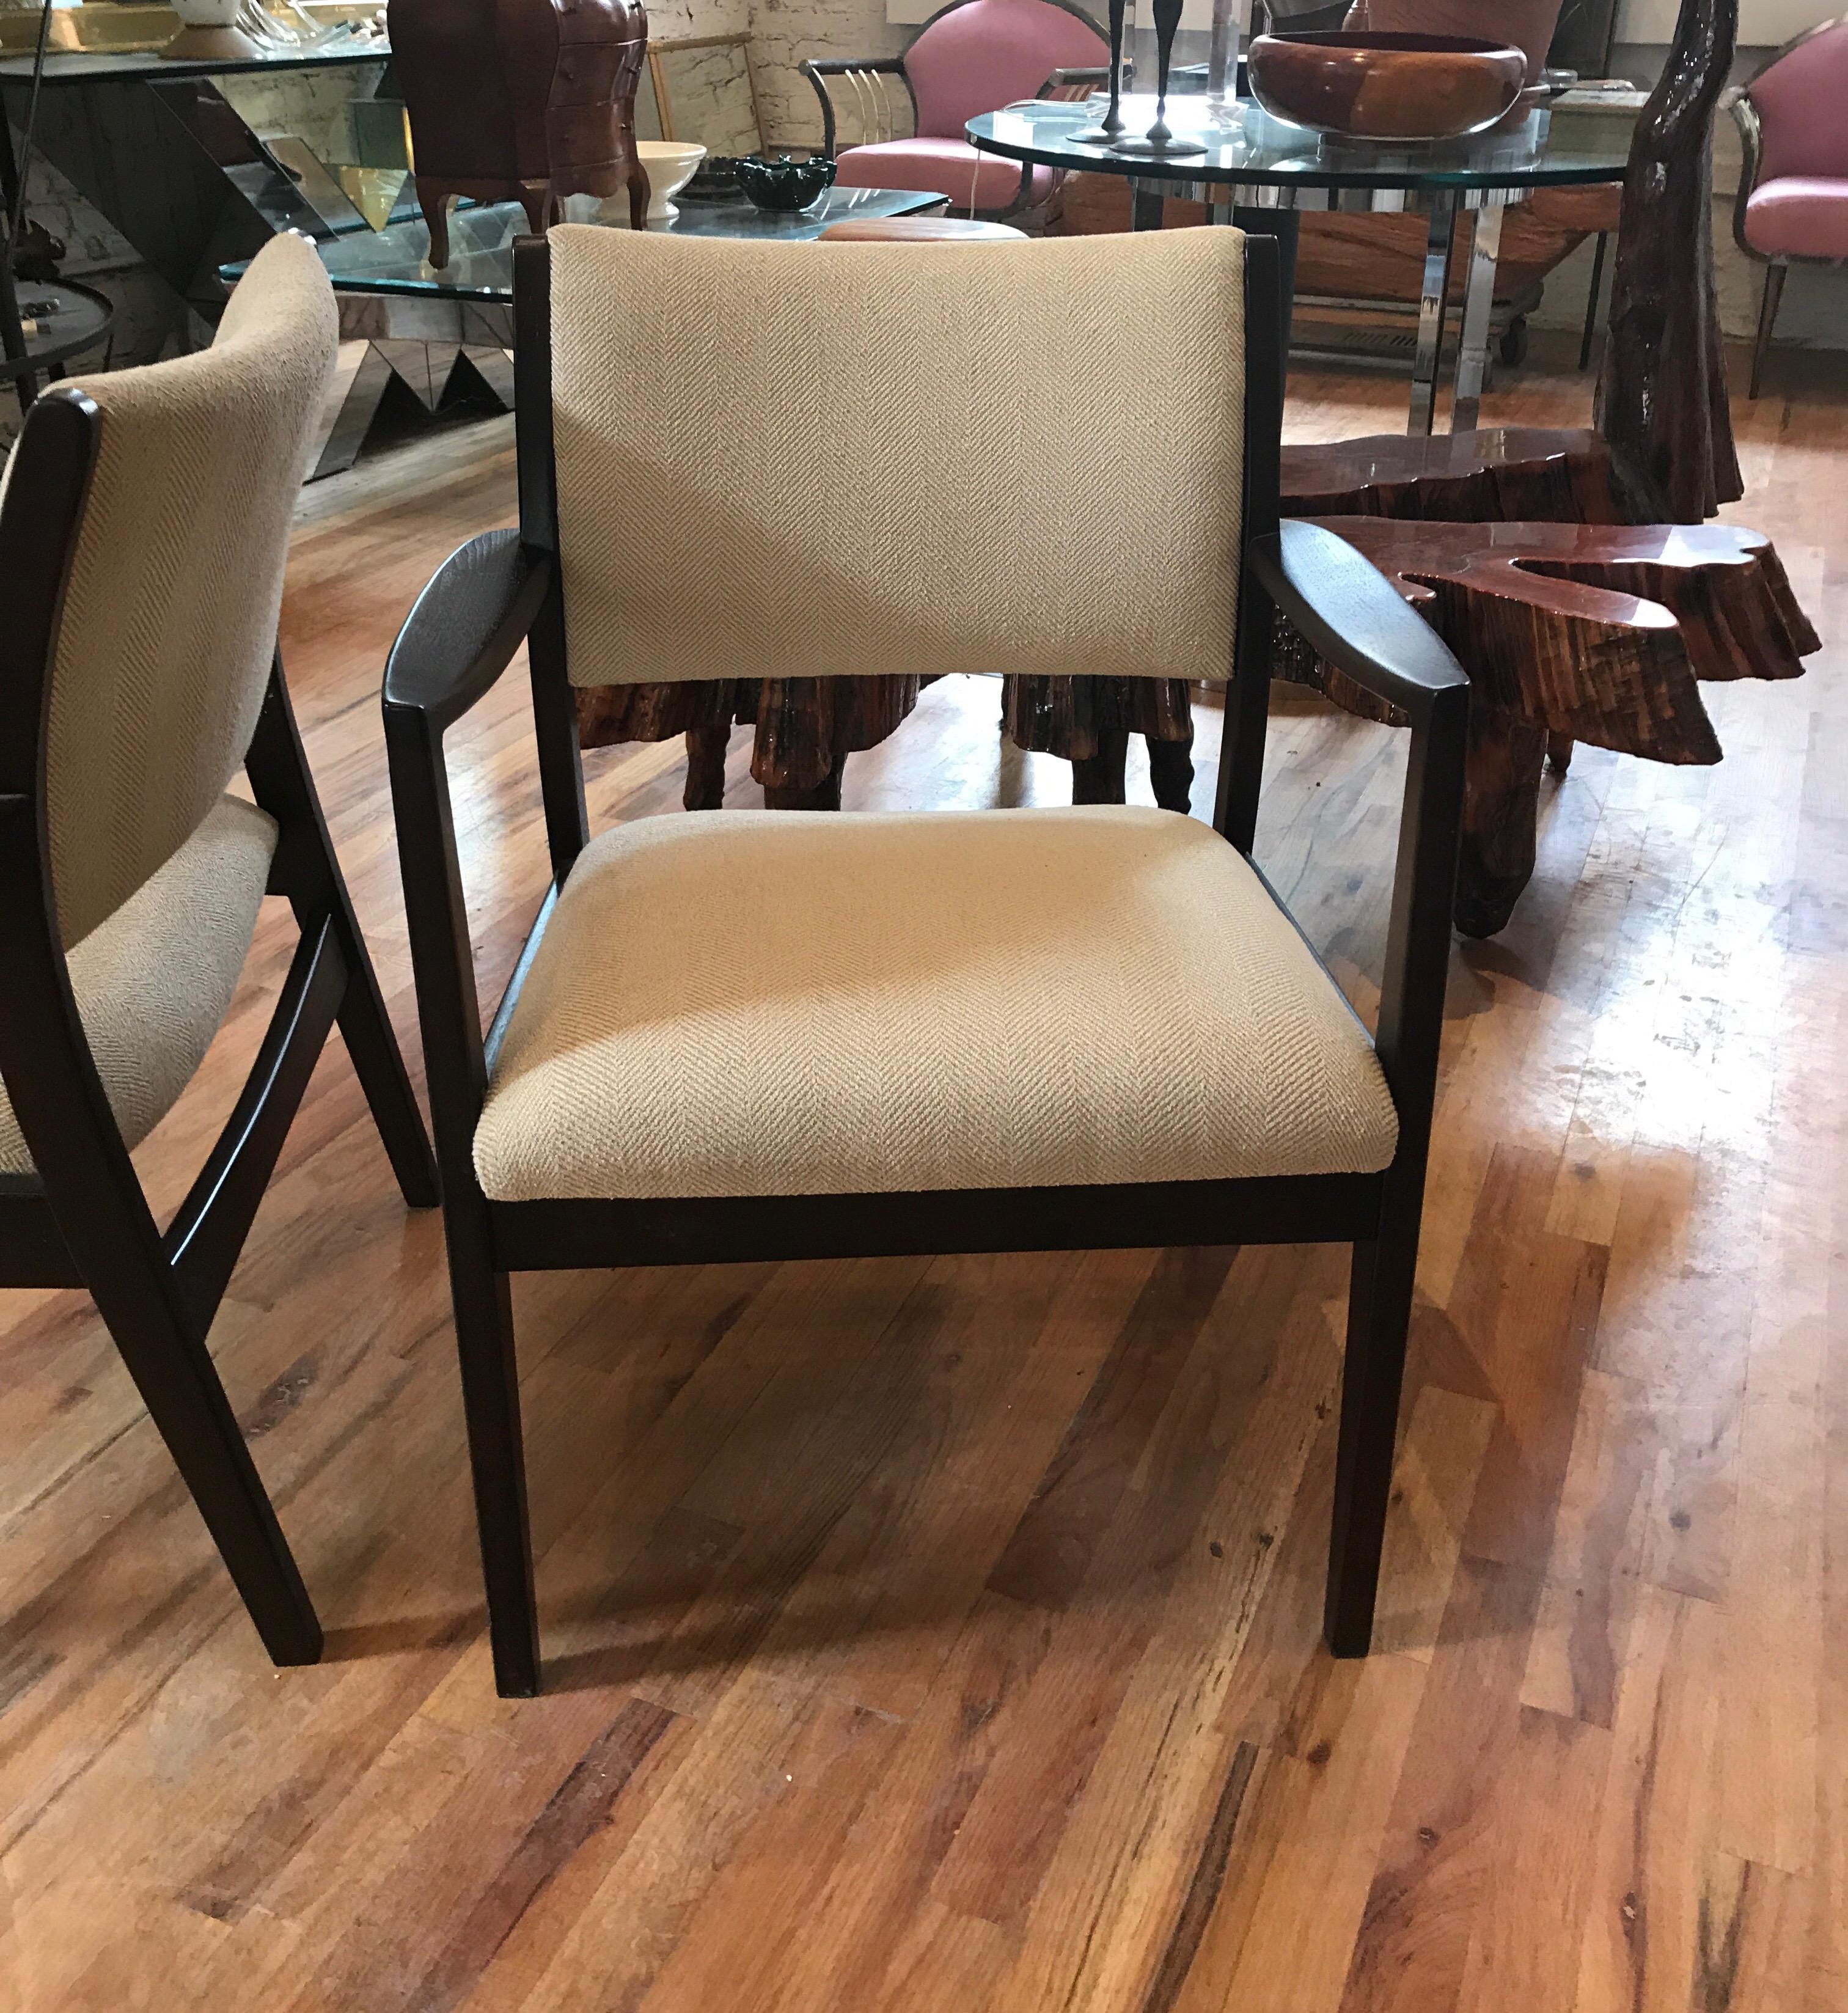 Pair of Jens Risom style Mid Century lounge chairs designed by George Reinoehl for Stow Davis.
The chairs frames are finished in a rich ebonized walnut.